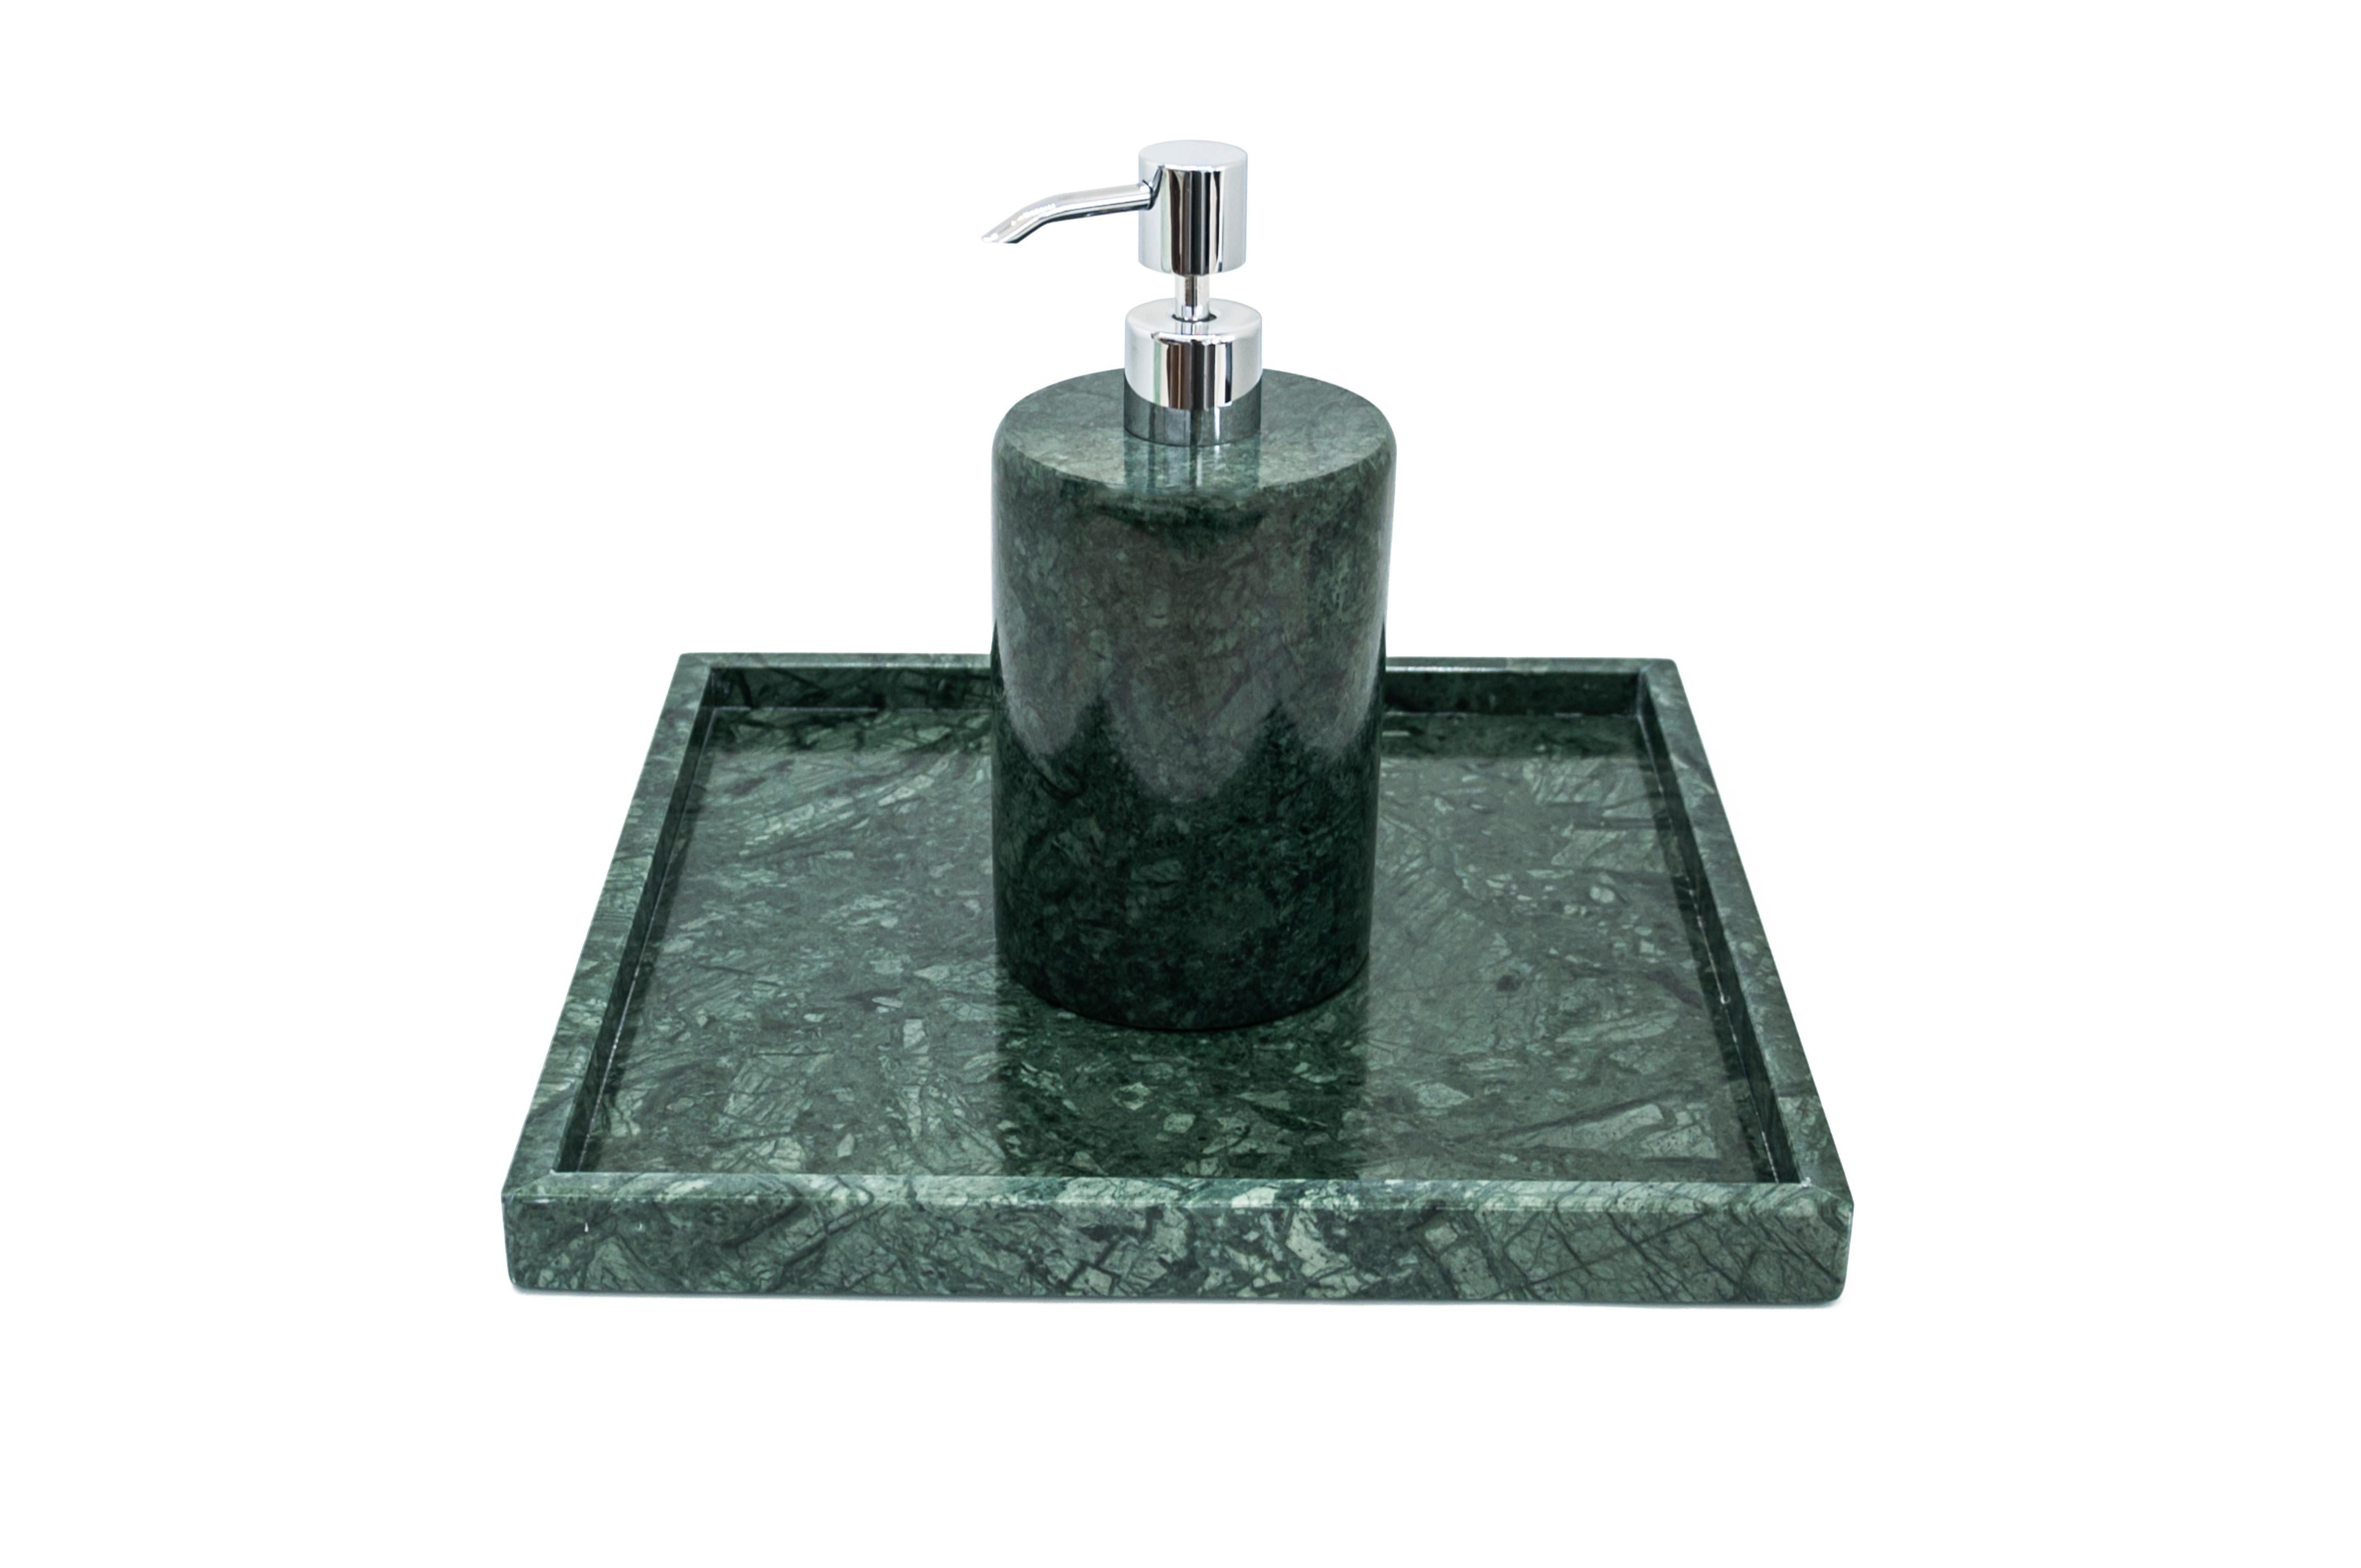 A rounded shape soap dispenser in green Guatemala marble.
Each piece is in a way unique (since each marble block is different in veins and shades) and handcrafted in Italy. Slight variations in shape, color and size are to be considered a guarantee